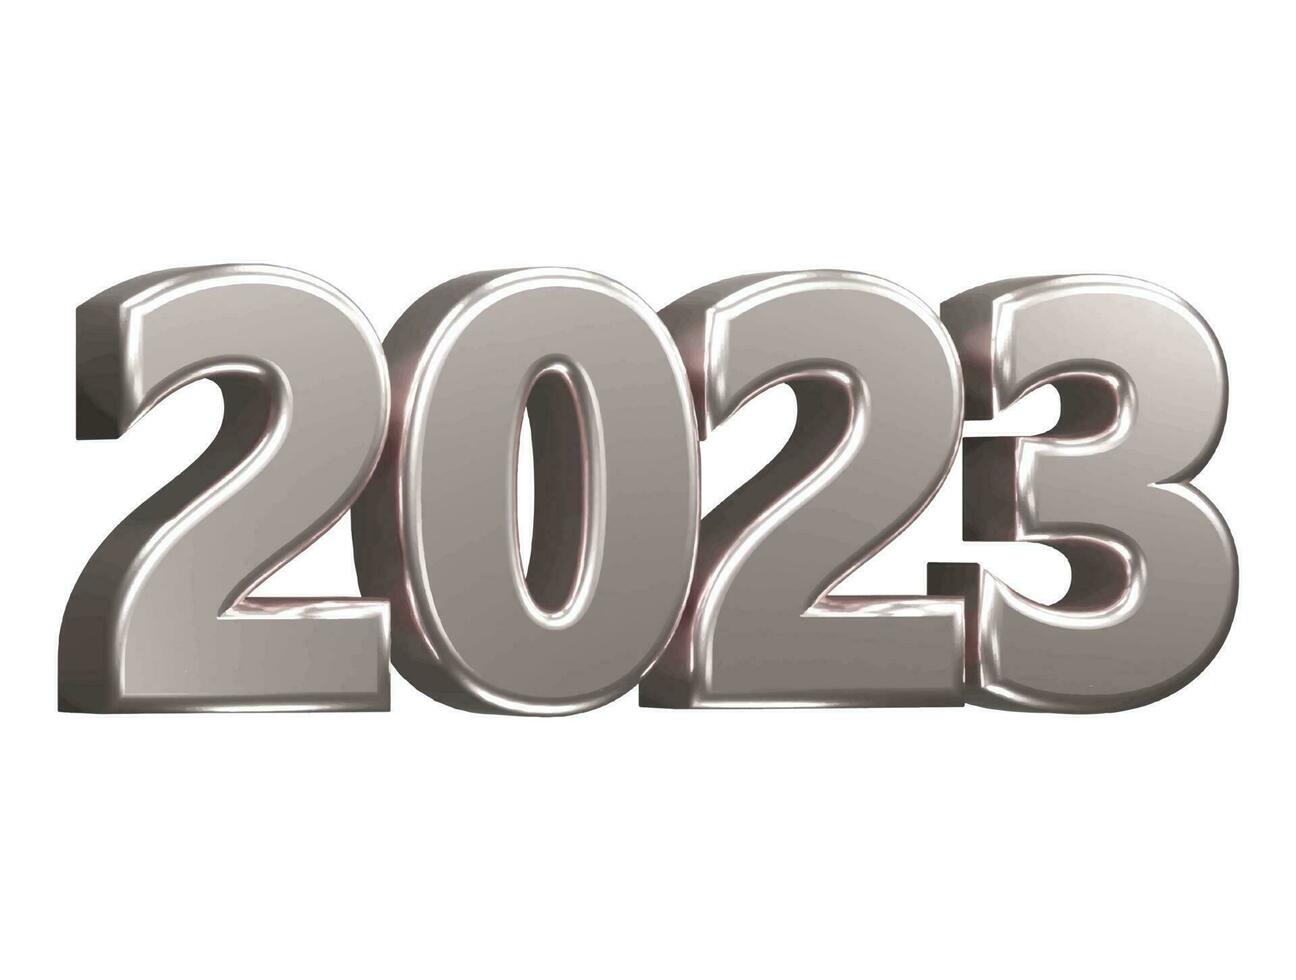 New year 2023 text effect vector illustration